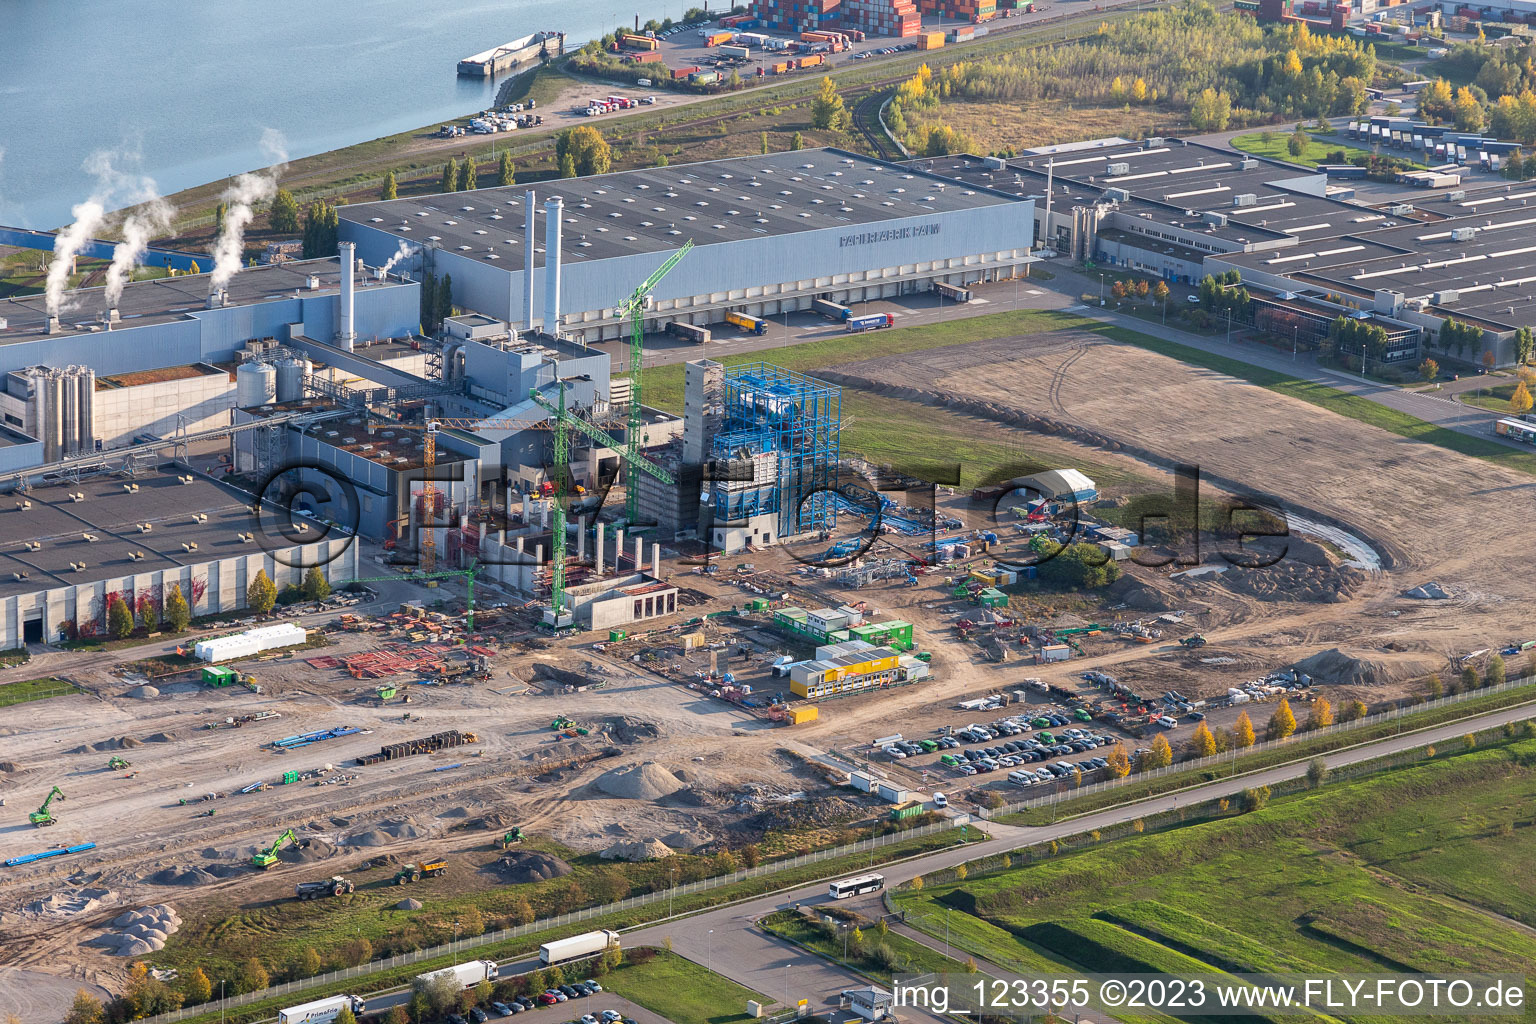 Aerial view of Construction of the new gas- hydrogen-power plant at paer mill Papierfabrik Palm GmbH & Co. KG in the district Industriegebiet Woerth-Oberwald in Woerth am Rhein in the state Rhineland-Palatinate